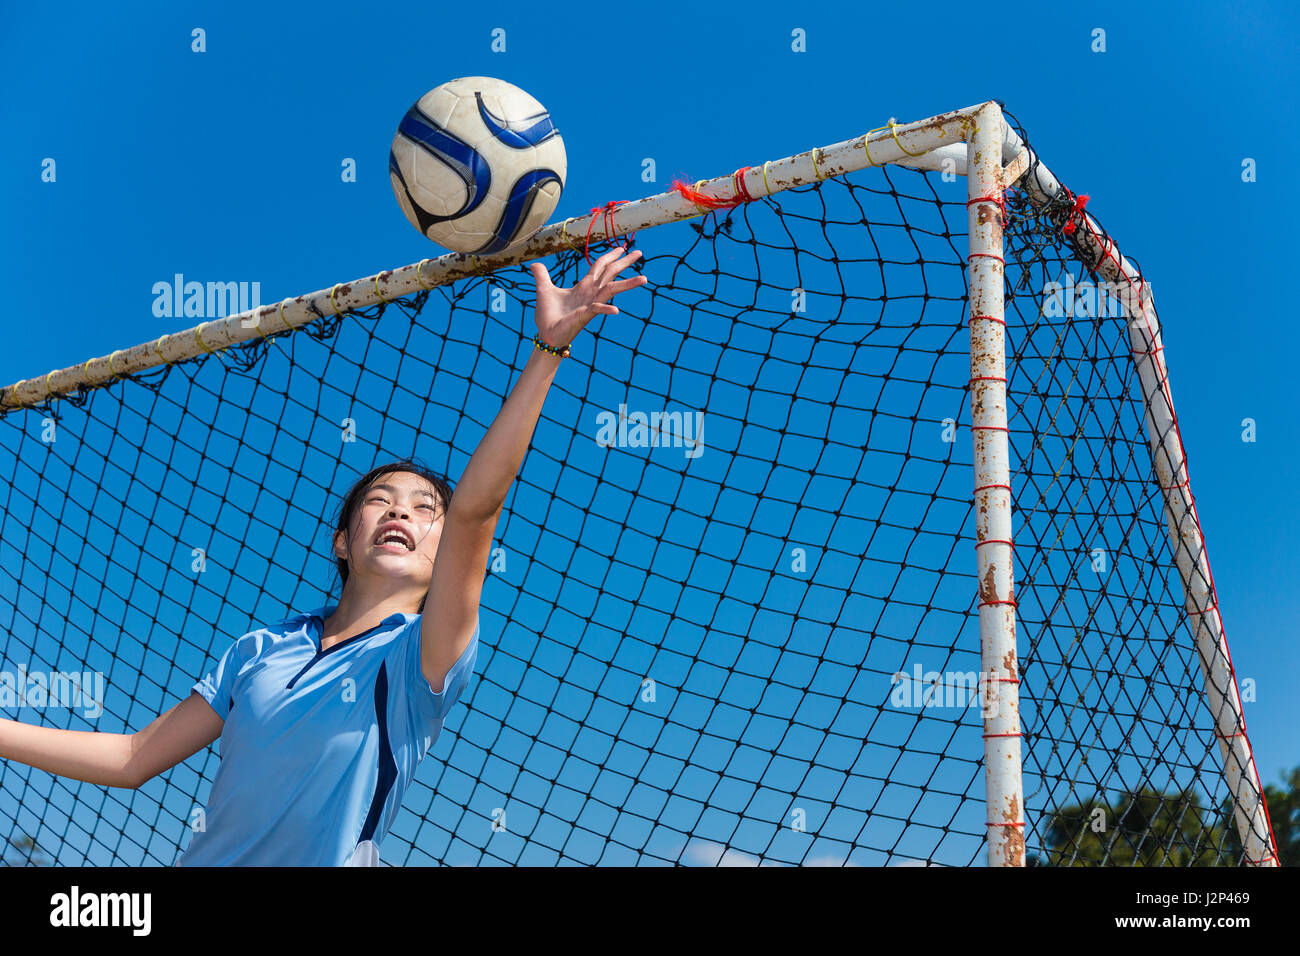 young asian girl goalkeeper catching the ball during a fun practice in a field on a clear blue sky day Stock Photo